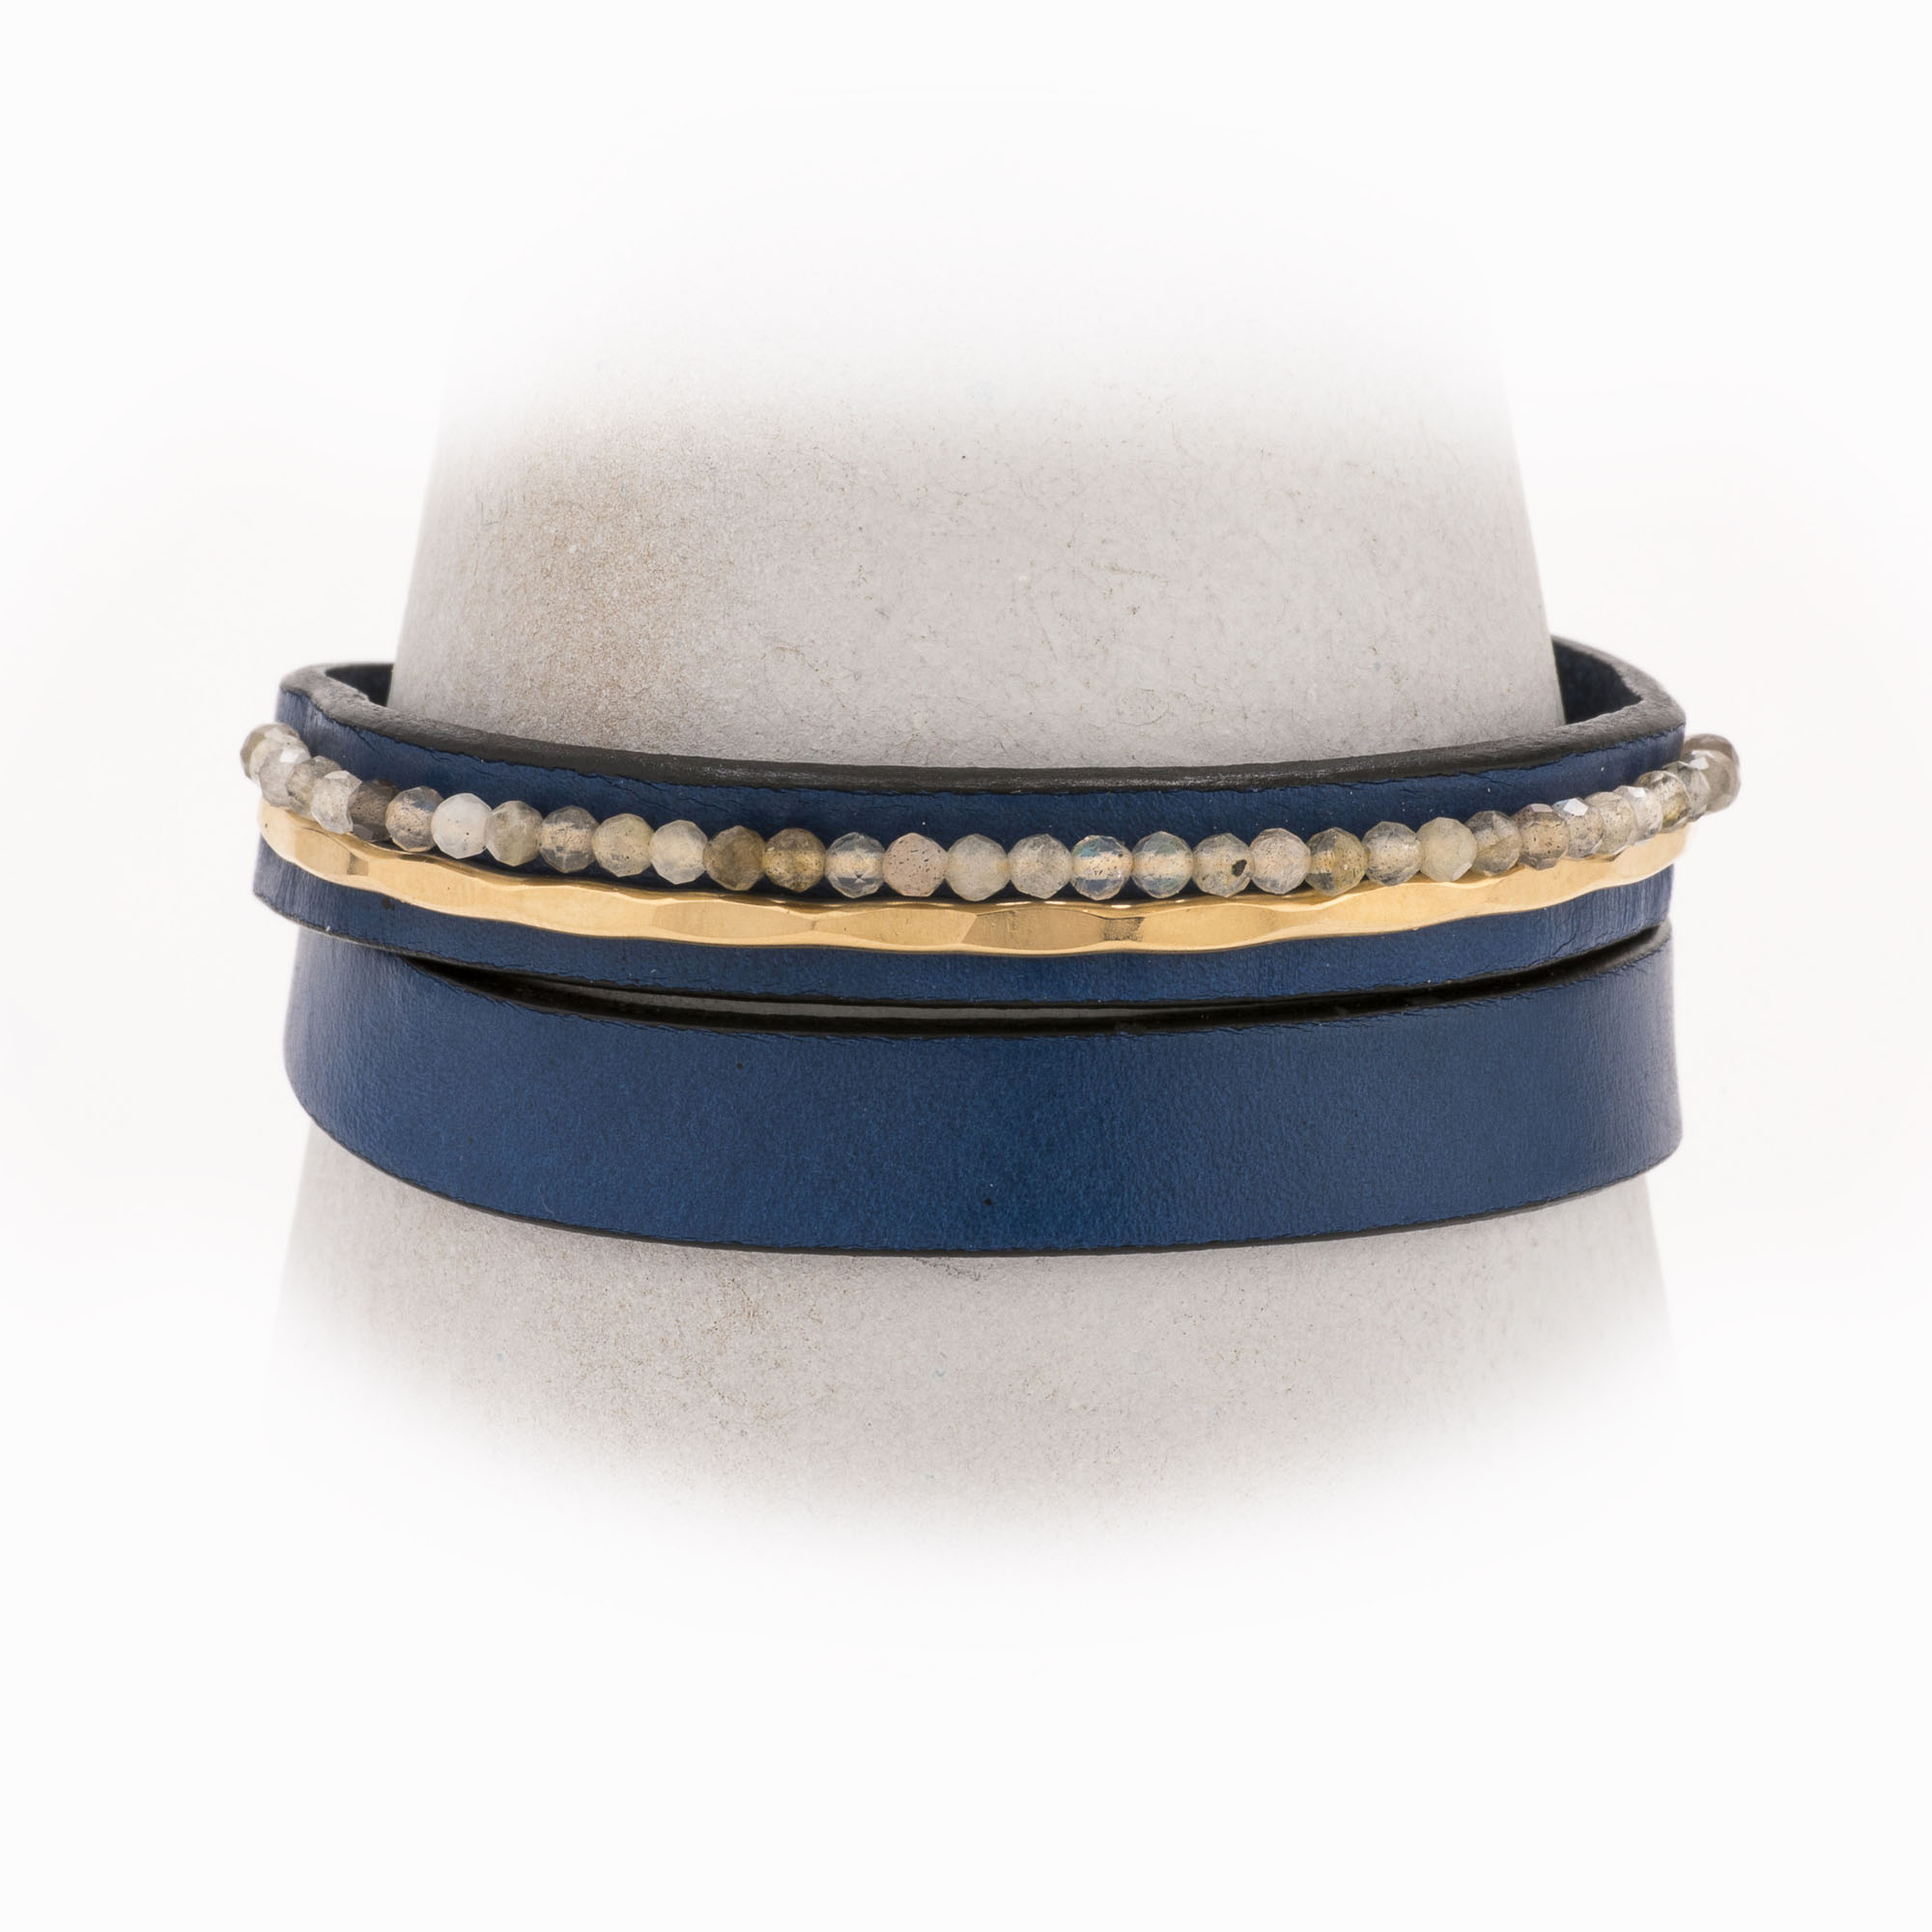 Featured image for “Claude Leather Bracelet”